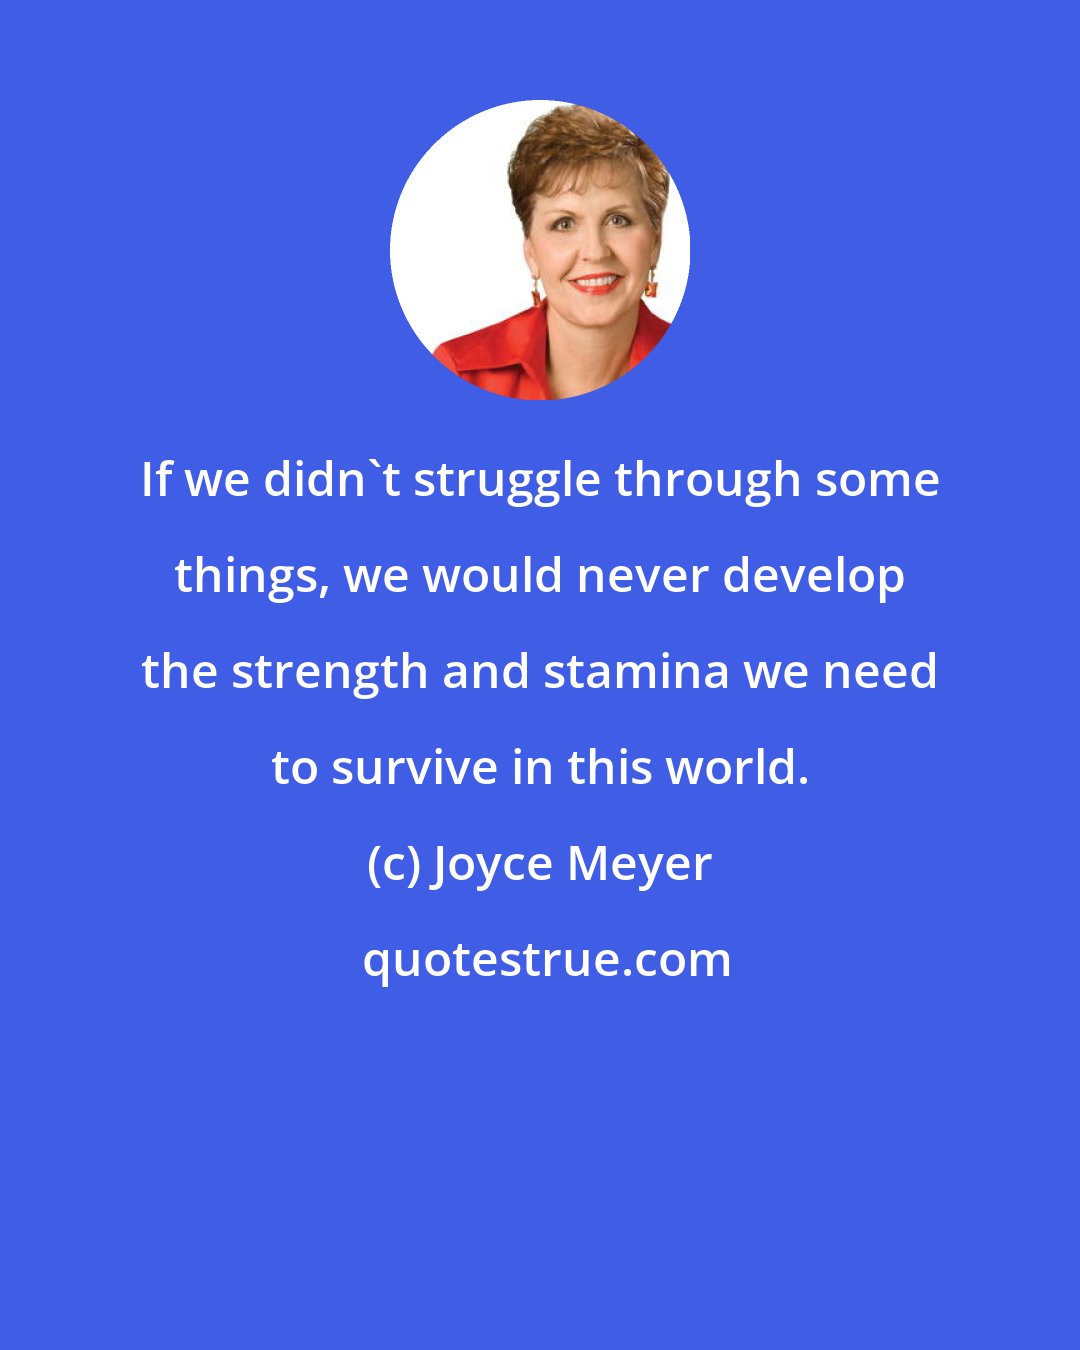 Joyce Meyer: If we didn't struggle through some things, we would never develop the strength and stamina we need to survive in this world.